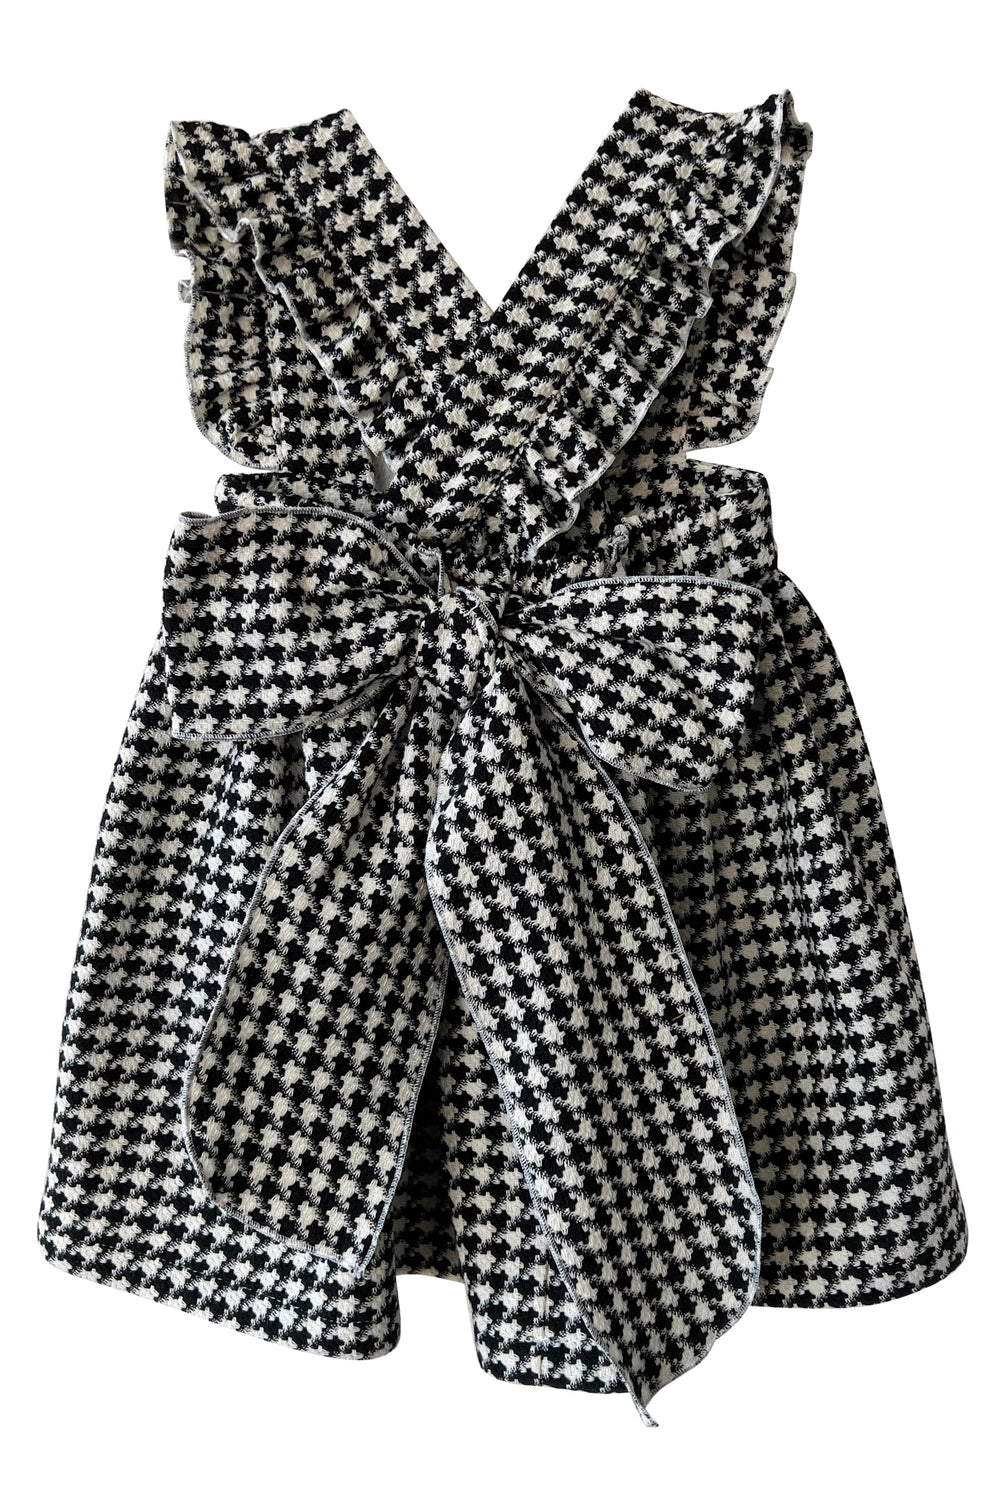 Phi "Prue" Black & White Houndstooth Pinafore Dress | Millie and John